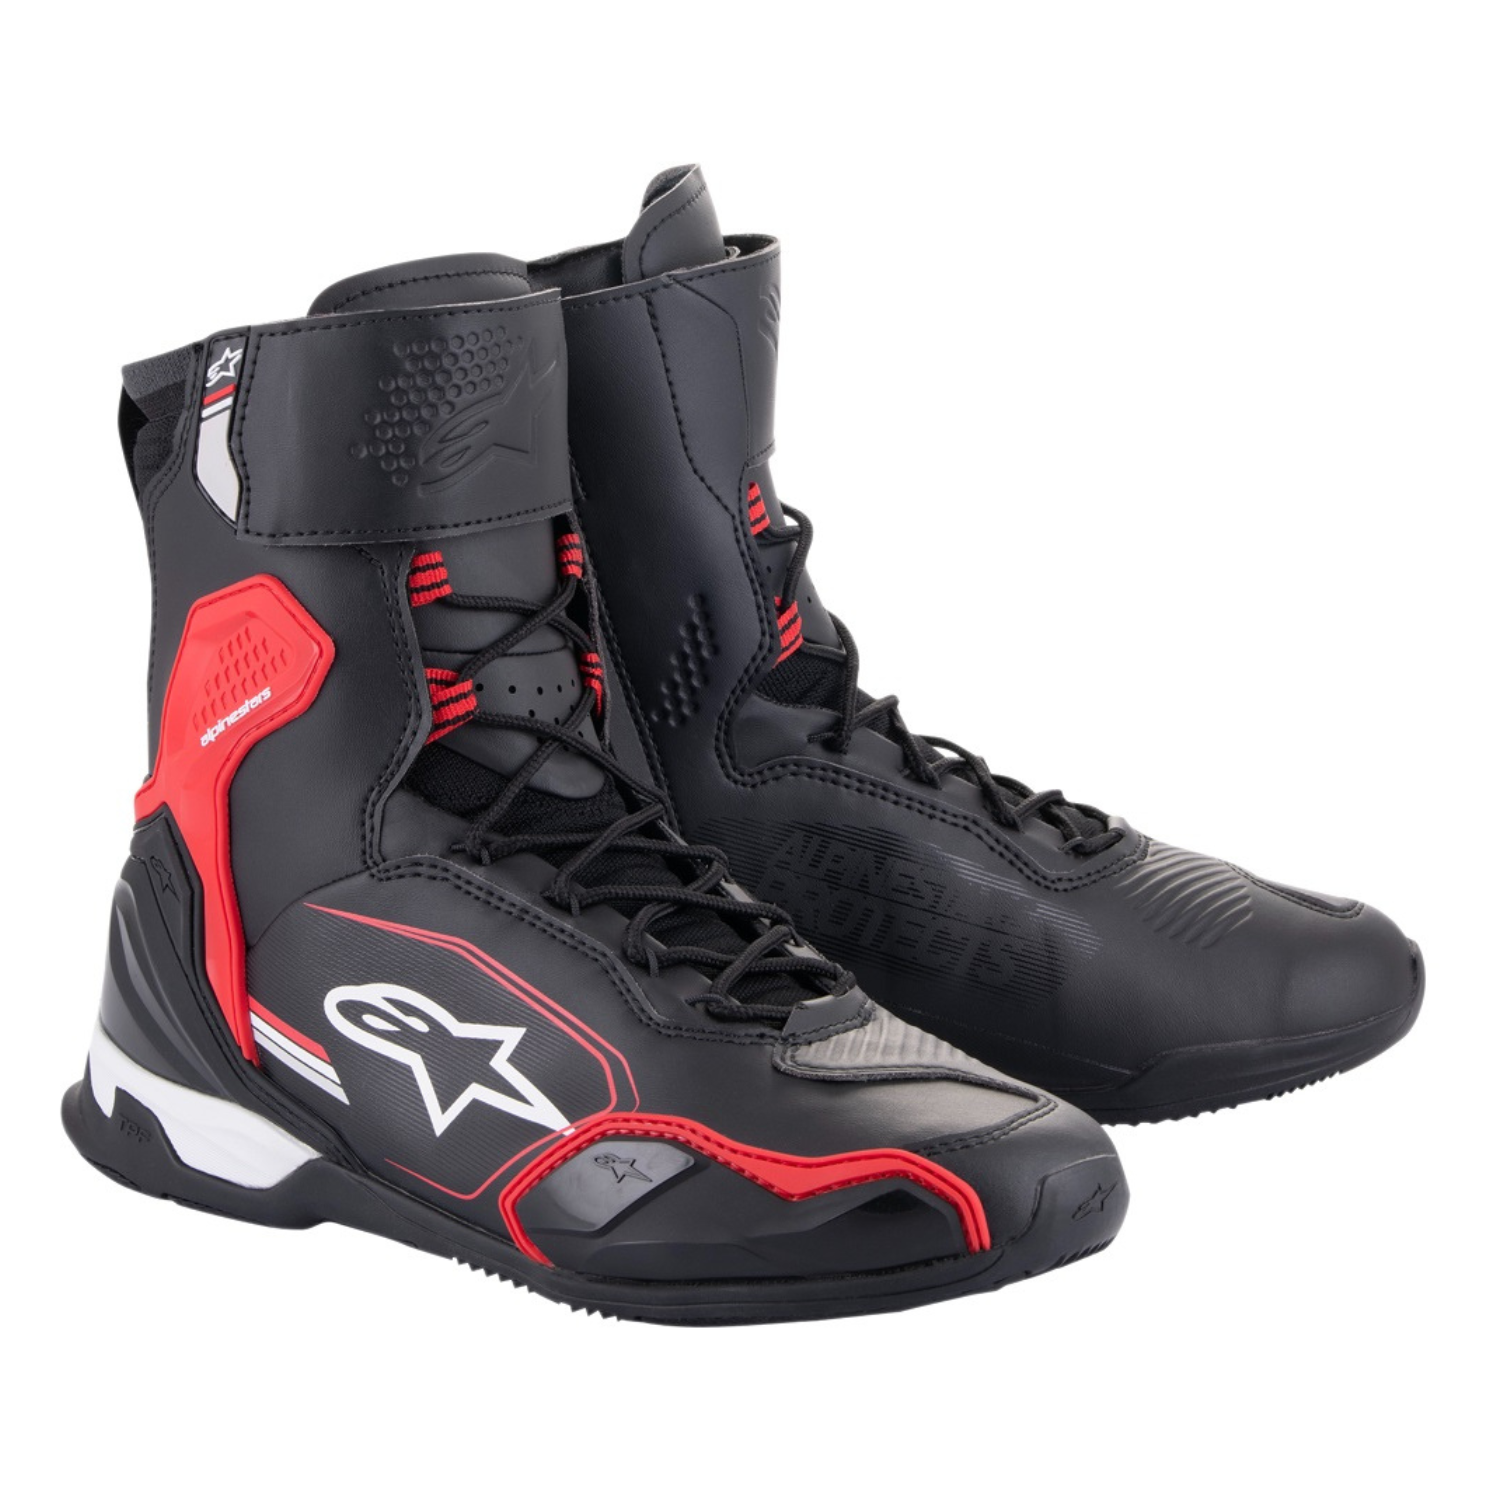 Image of Alpinestars Superfaster Shoes Black Bright Red White Size US 135 ID 8059347261041